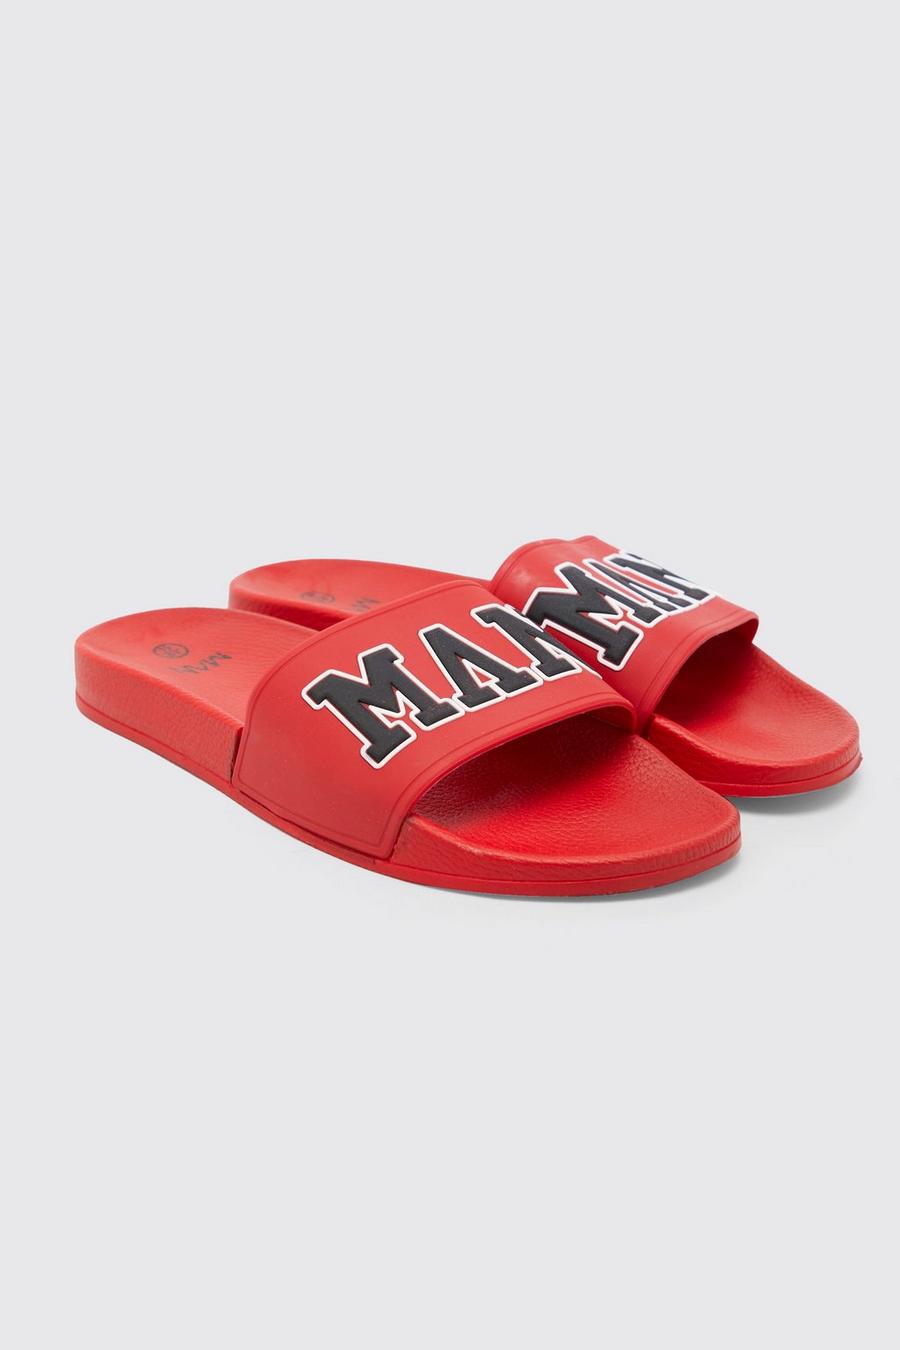 Claquettes style universitaire - MAN, Red